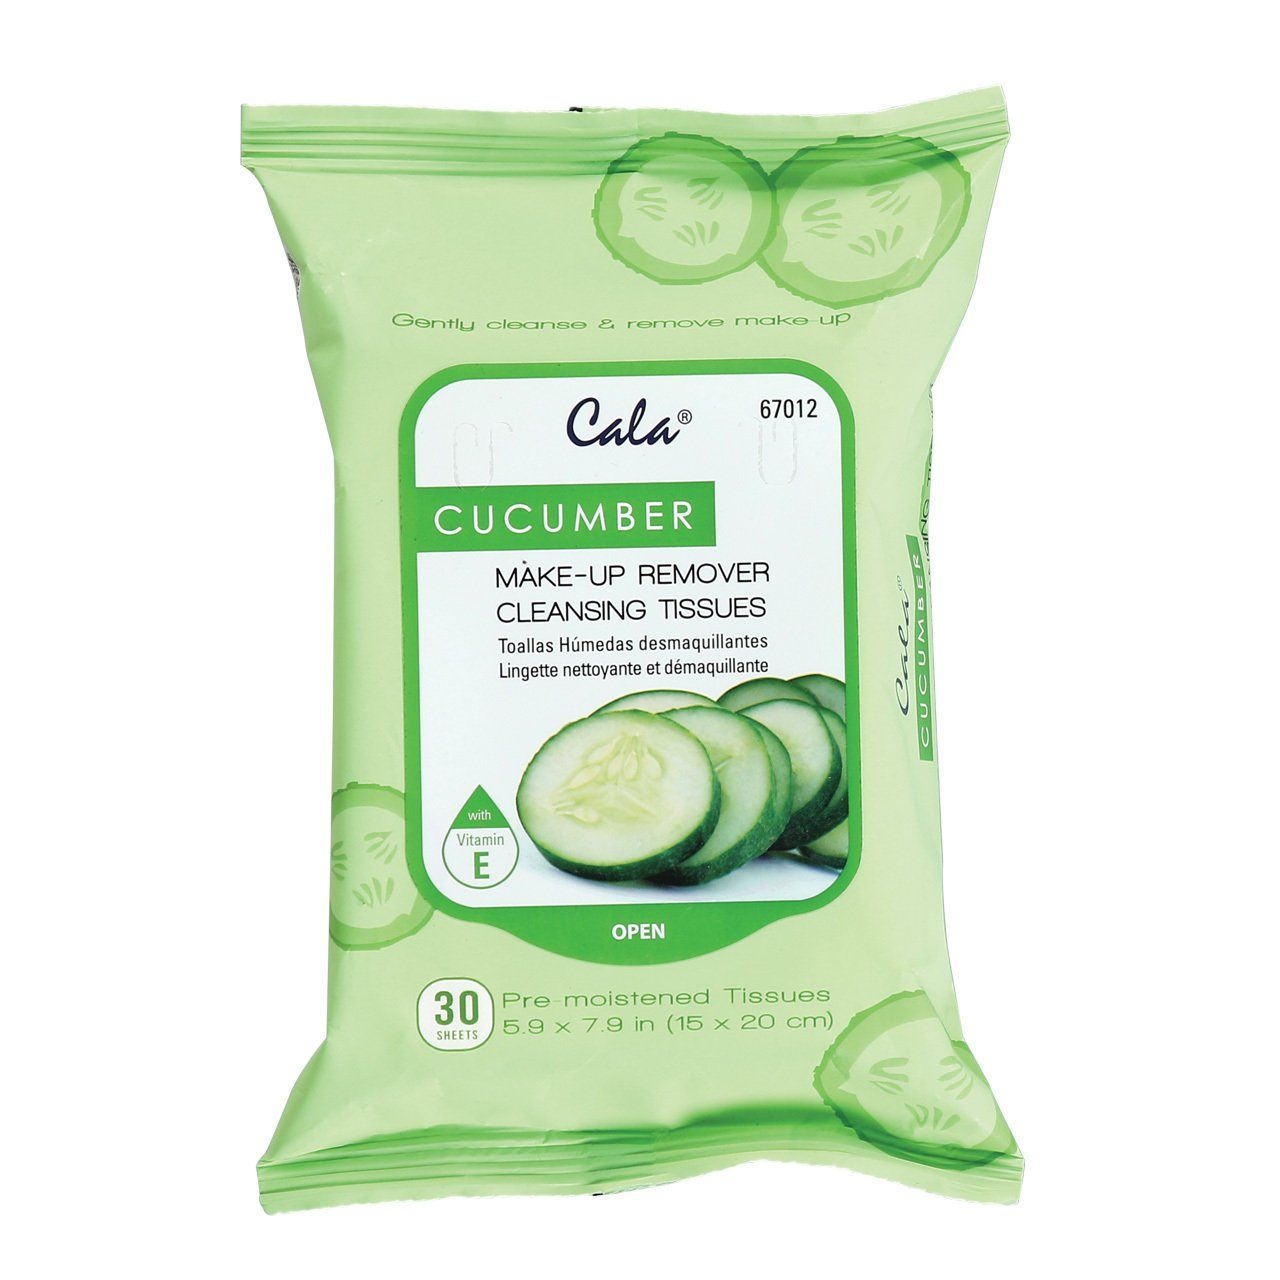 Cala Cucumber Makeup Remover Cleansing Tissues #67012 (6PC)